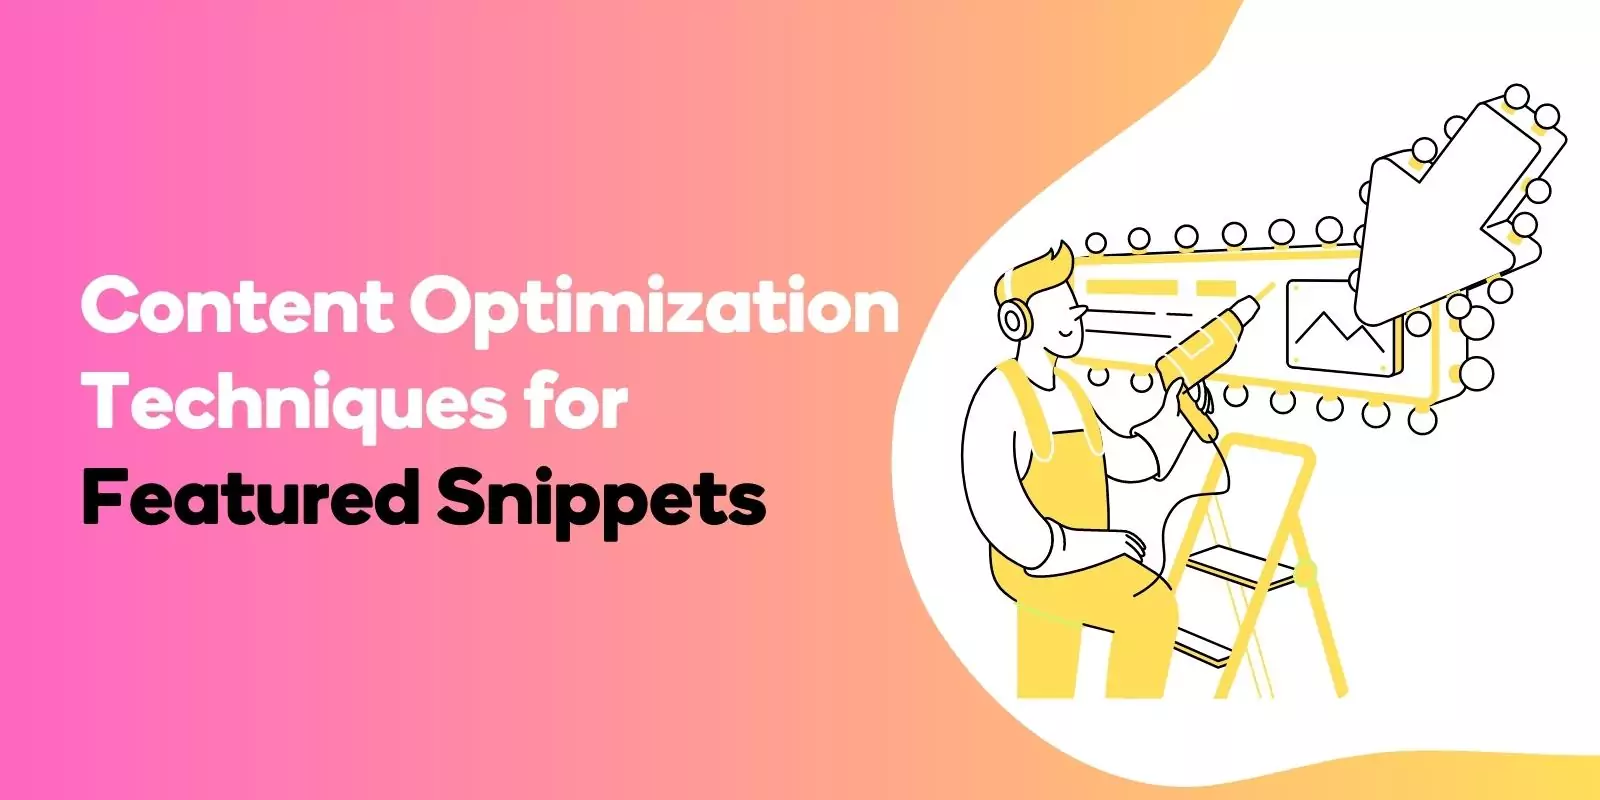 Content Optimization Techniques for Featured Snippets